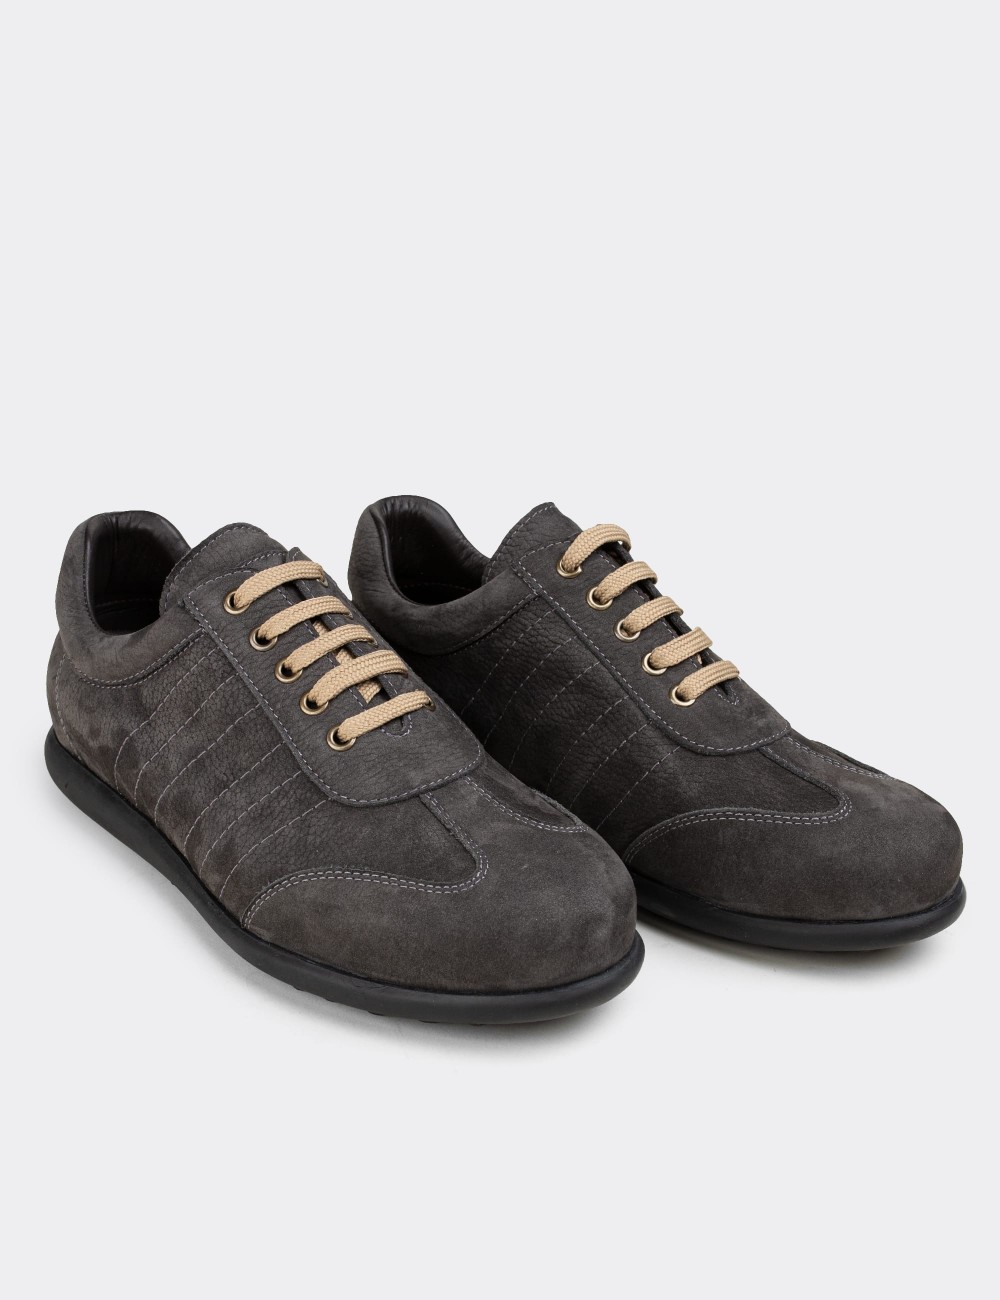 Gray Nubuck Leather Lace-up Shoes - 01826MGRIC01